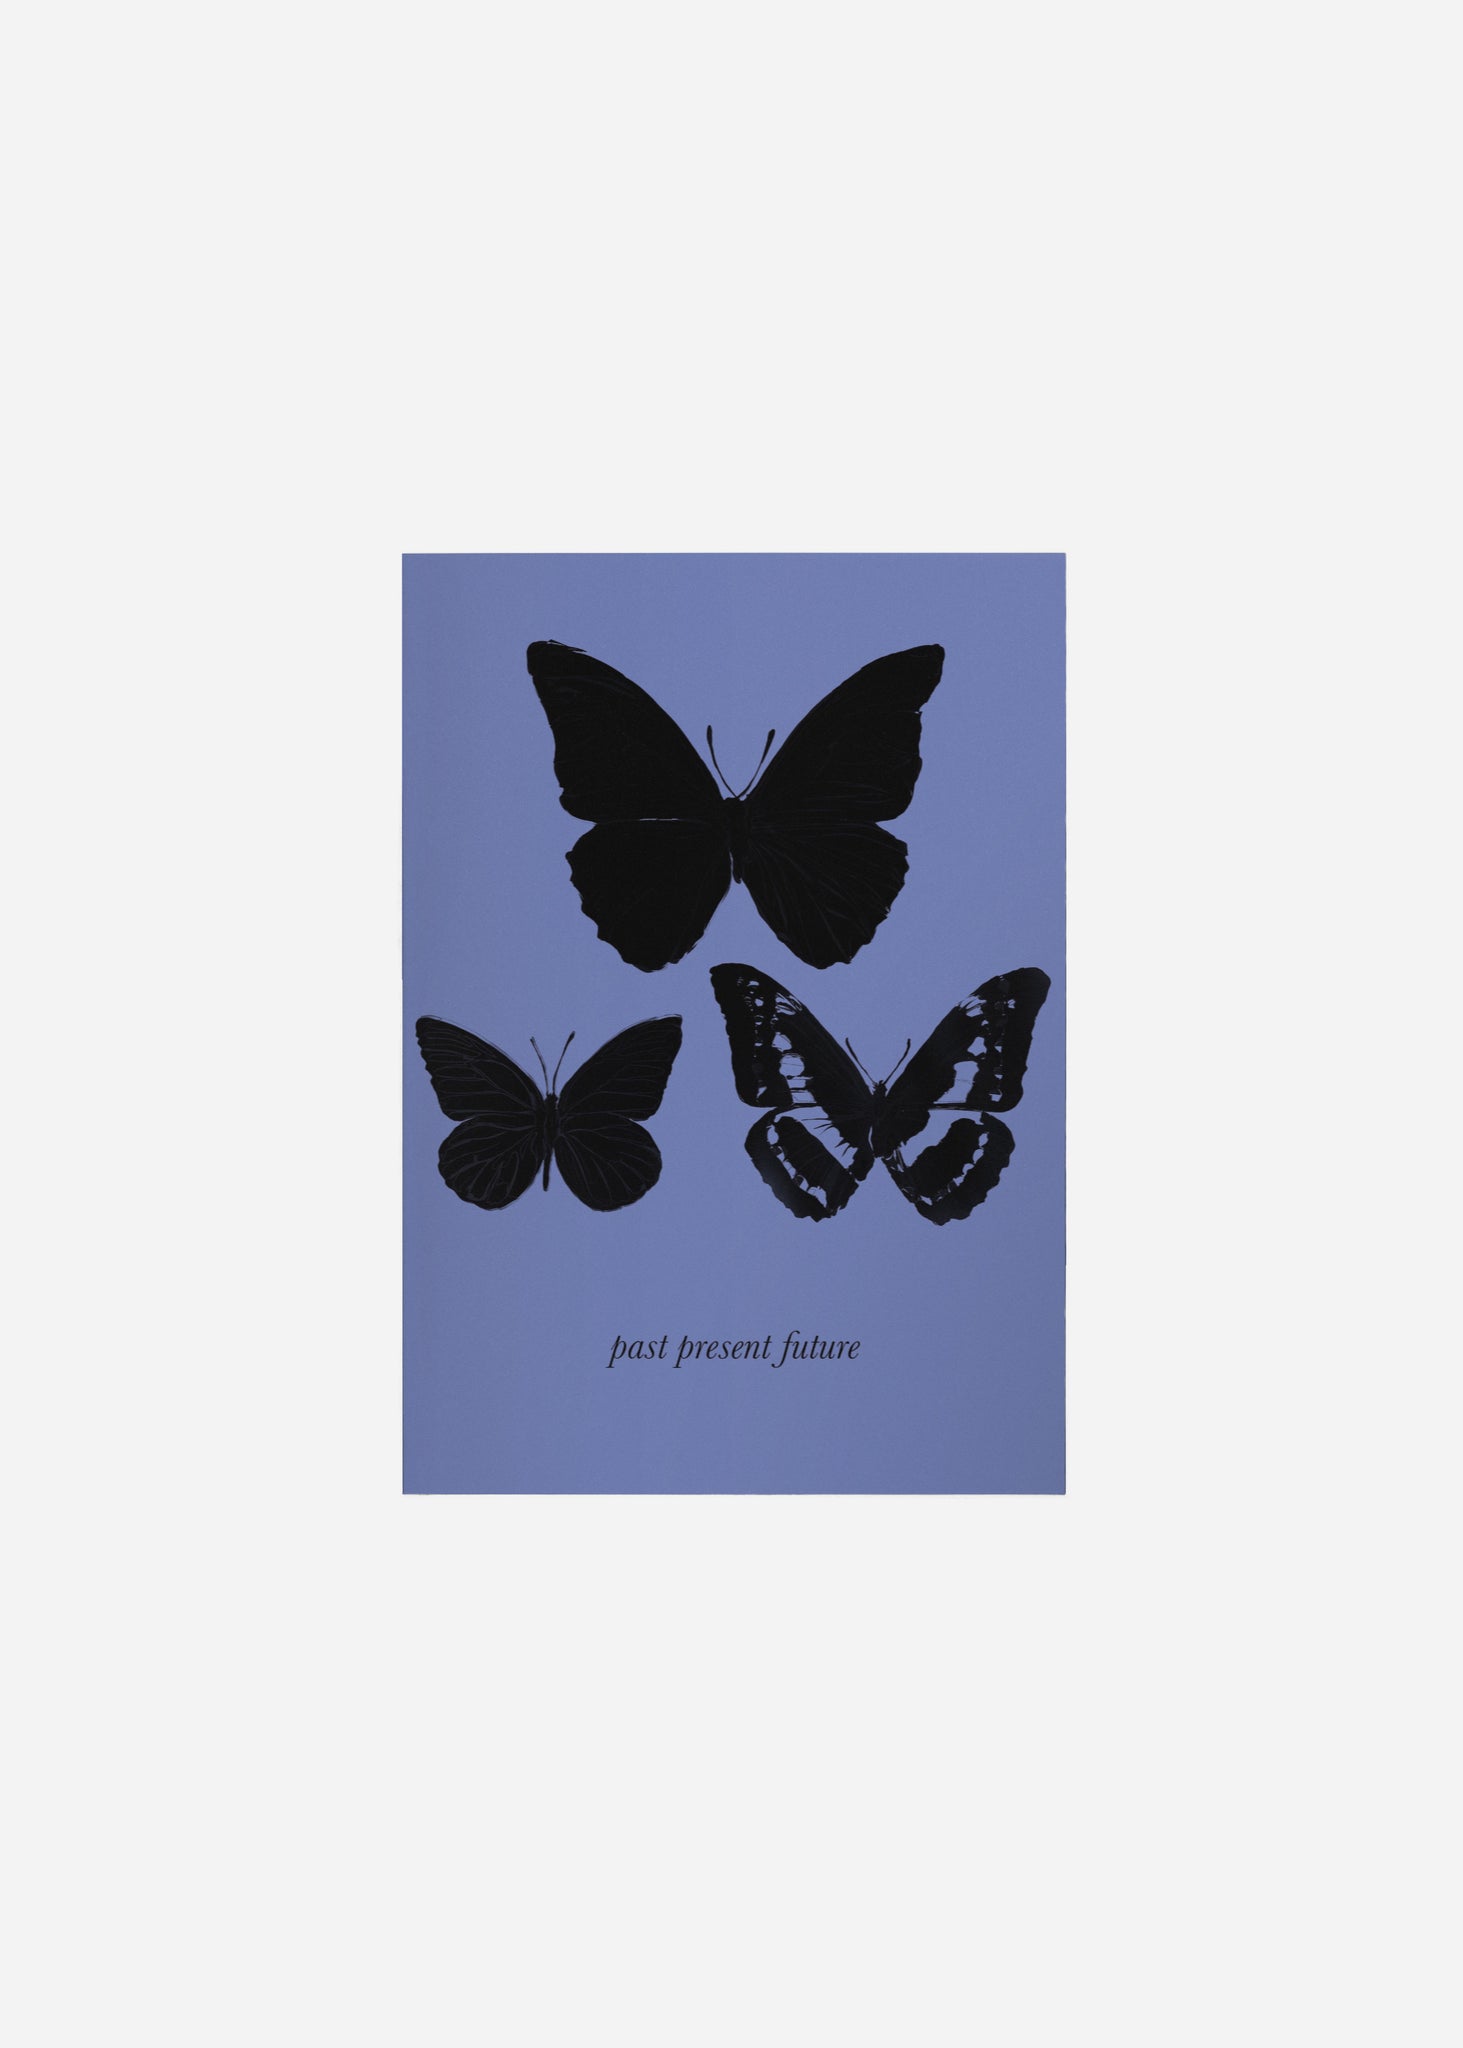 The Butterfly Effect / Past Present Future Fine Art Print